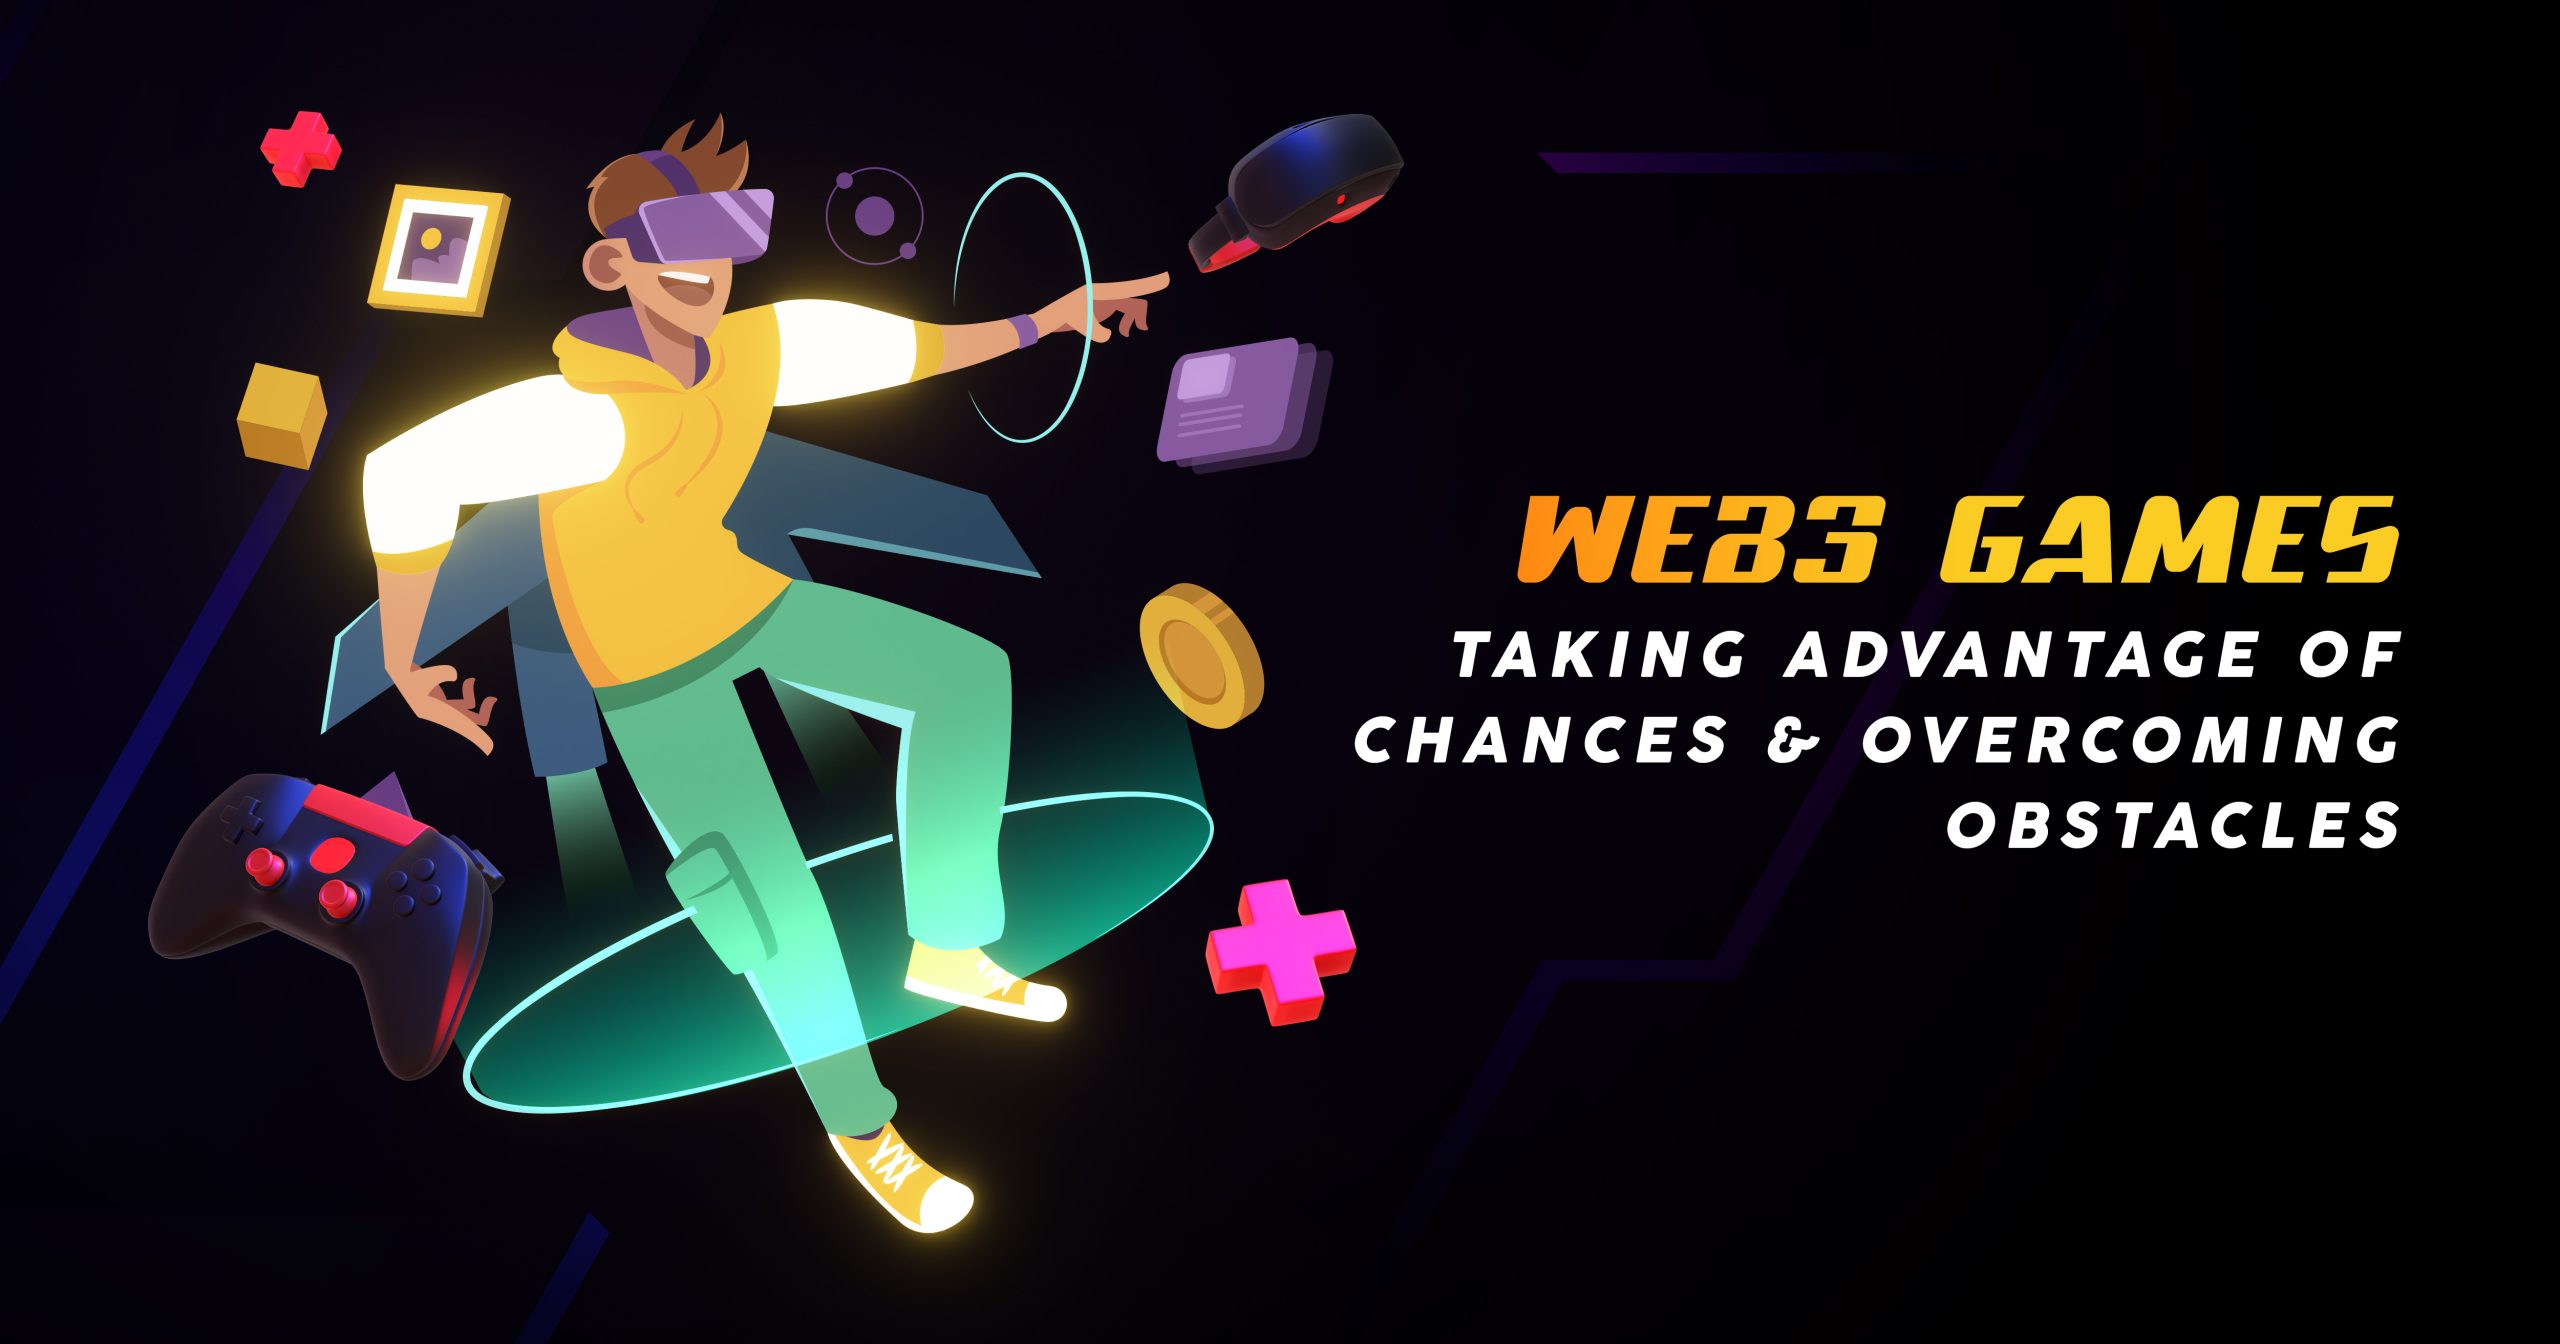 Web3 Games: Taking Advantage Of Chances & Overcoming Obstacles